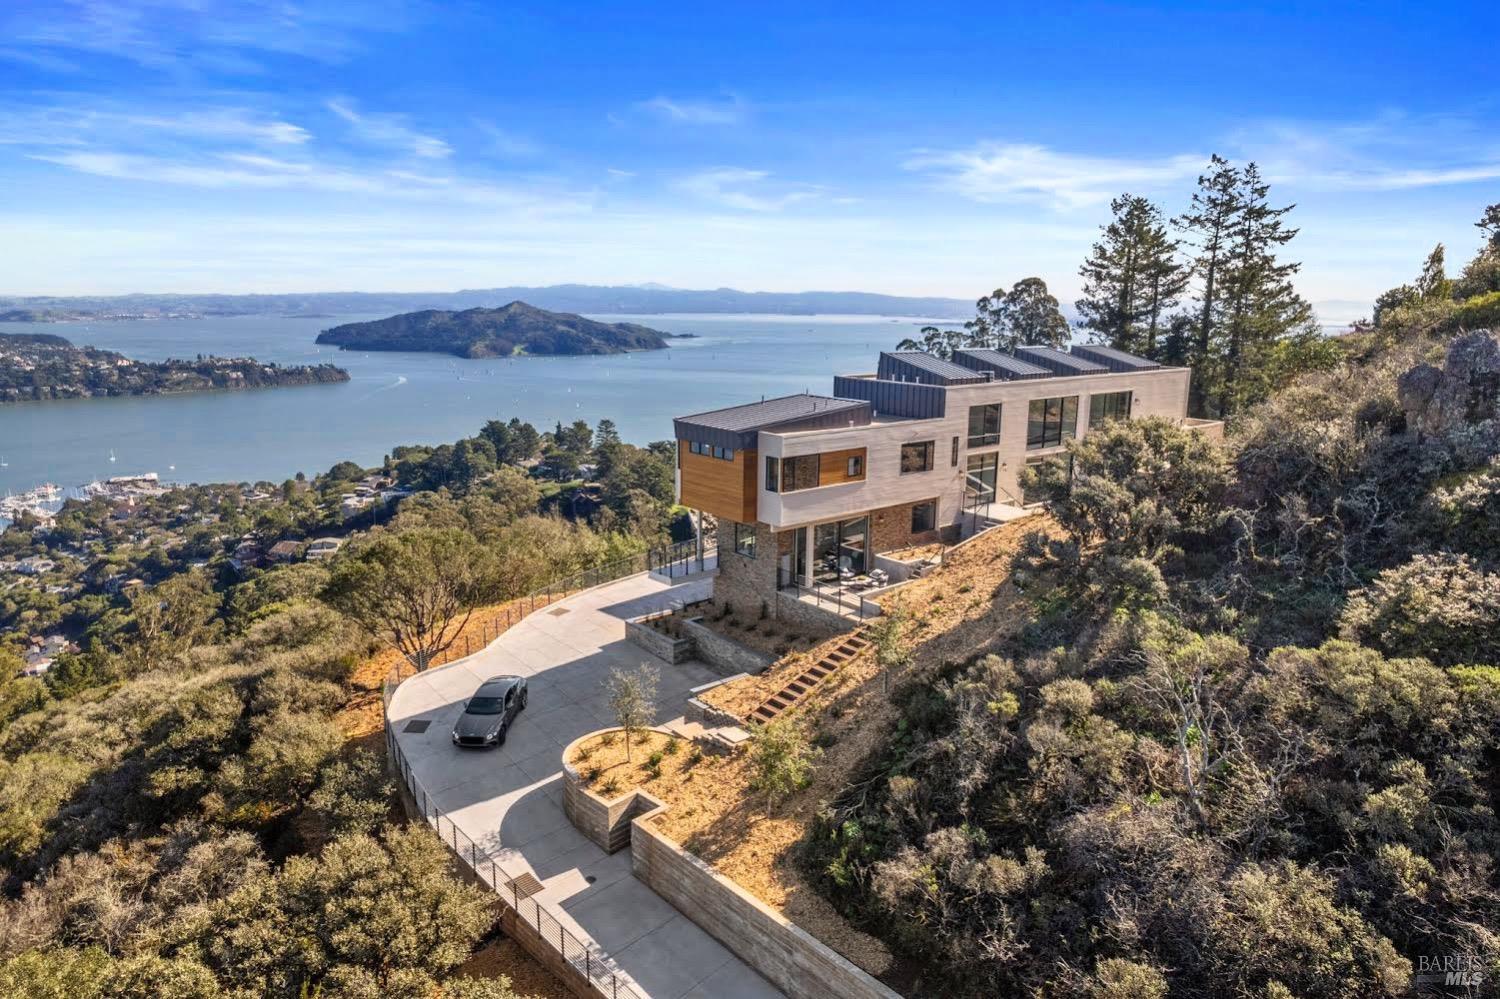 *New Construction* Welcome to The Ridge House, a ridgetop residence discreetly nestled in the coveted Wolfback Ridge neighborhood of Sausalito. Immerse in breathtaking views of Richardson Bay, Belvedere Island, Angel Island and Mt.Tam, all while being just a few minutes away from the vibrant city. This architectural masterpiece boasts a contemporary design, sleek finishes, and an abundance of natural light. The open concept floor plan creates a seamless flow between the living spaces, providing an ideal setting for both entertaining and everyday living. The main level features floor-to-ceiling windows with oversized pocket doors, allowing you to enjoy the mesmerizing Bay views from every angle. The gourmet kitchen is a chef's dream, equipped with state-of-the-art finishes, 2 large walk-in pantries, a generous center island and a indoor-outdoor lounge area perfect for entertaining. The primary suite is a true oasis, offering a tranquil retreat from the hustle and bustle of daily life. Enjoy multiple terraces where you can relax and soak in the stunning surroundings - plus a private gated driveway taking you to a 3-car garage and ample guest parking. Just a few minutes away from world-class dining & yacht clubs, The Ridge House is the epitome of sophisticated coastal living!